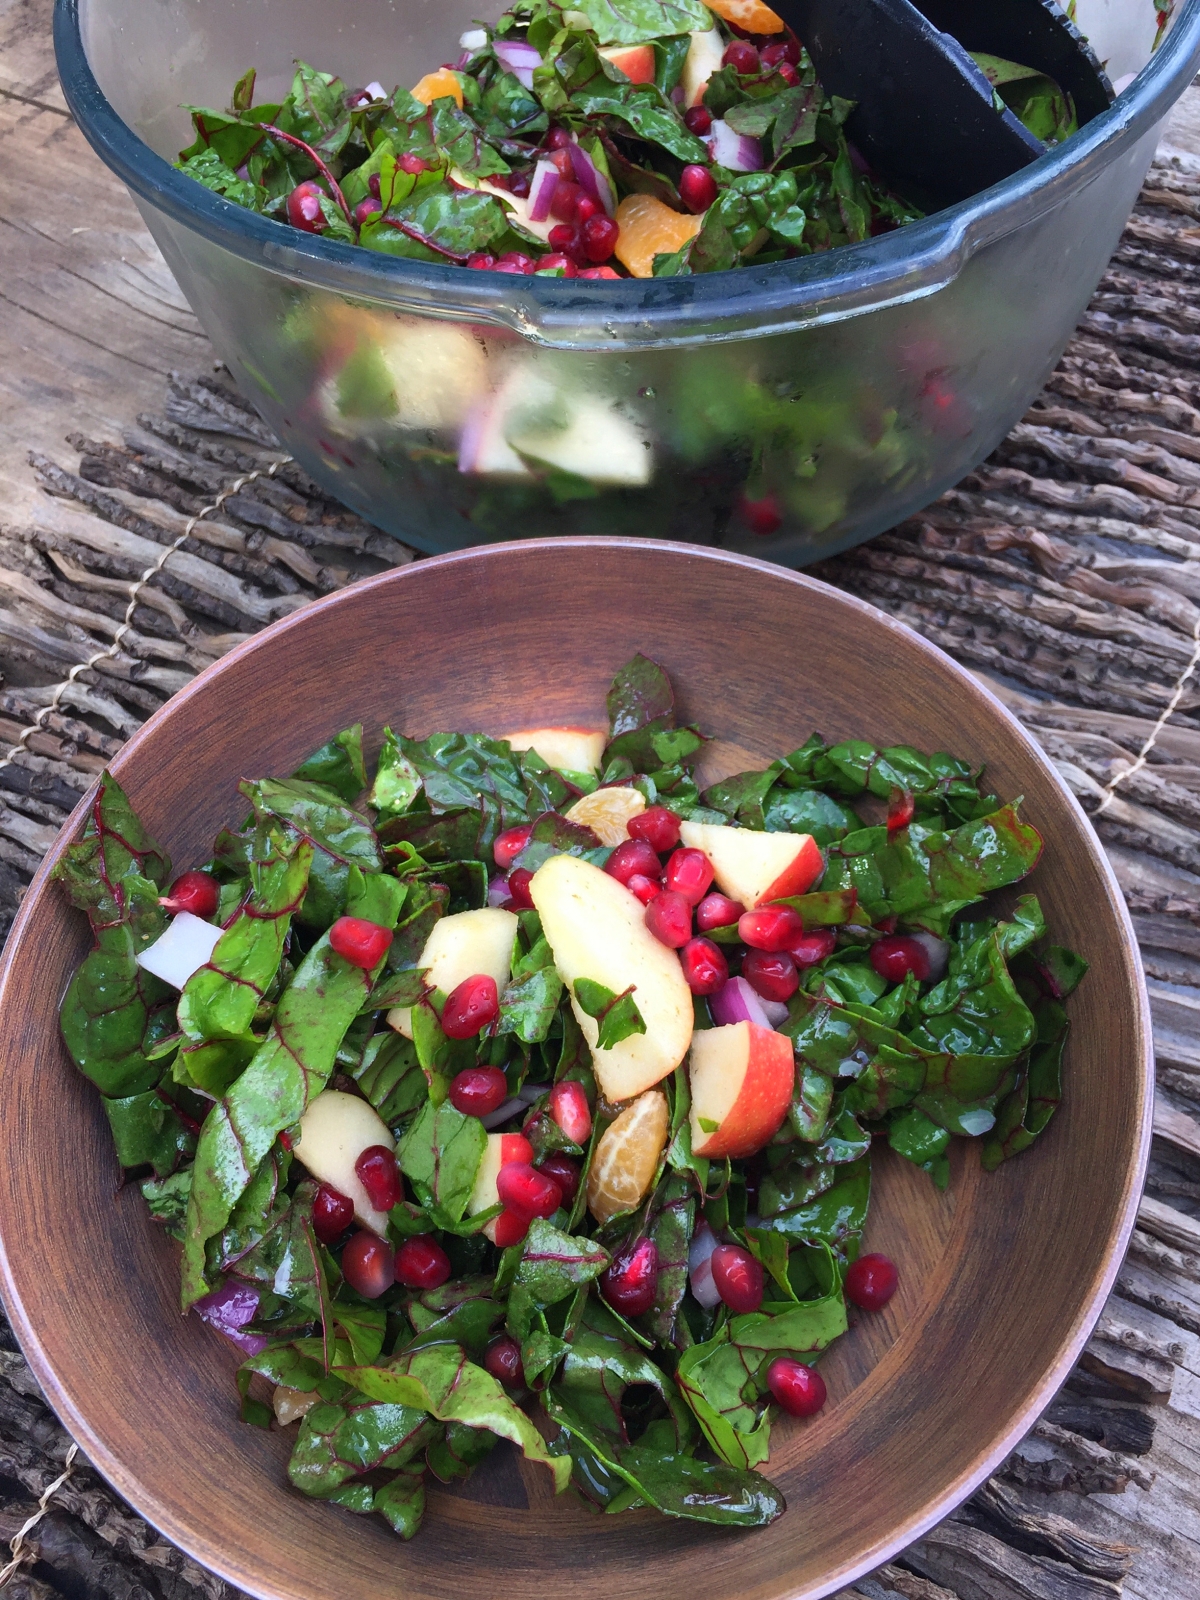 Swiss Chard & Pomegranate Salad with No Oil Dressing